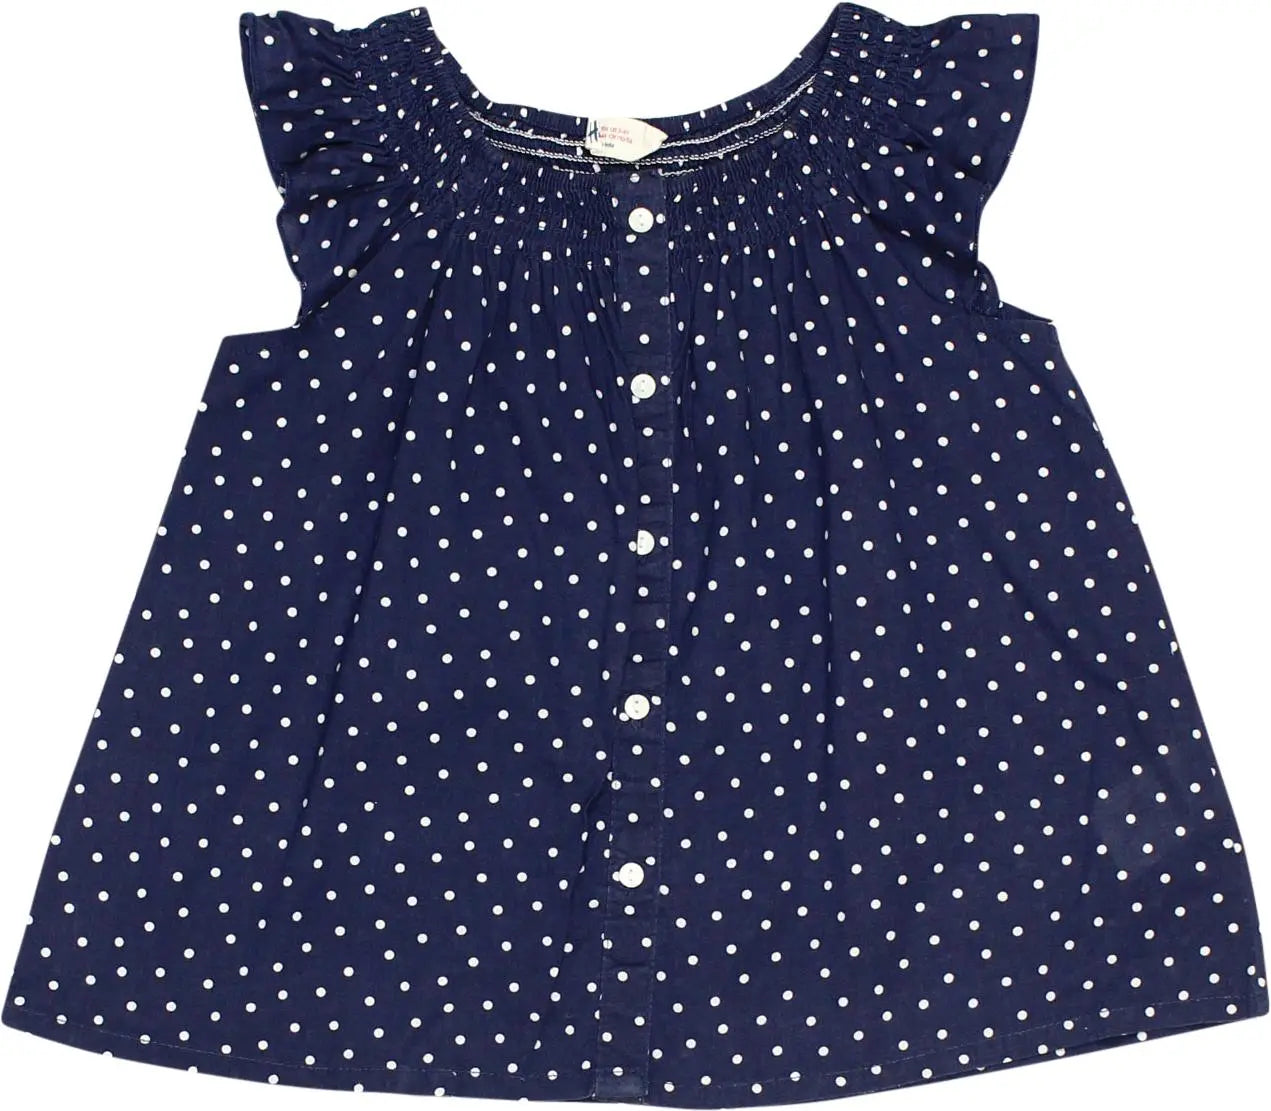 H&M - Blue Polkadot Dress- ThriftTale.com - Vintage and second handclothing